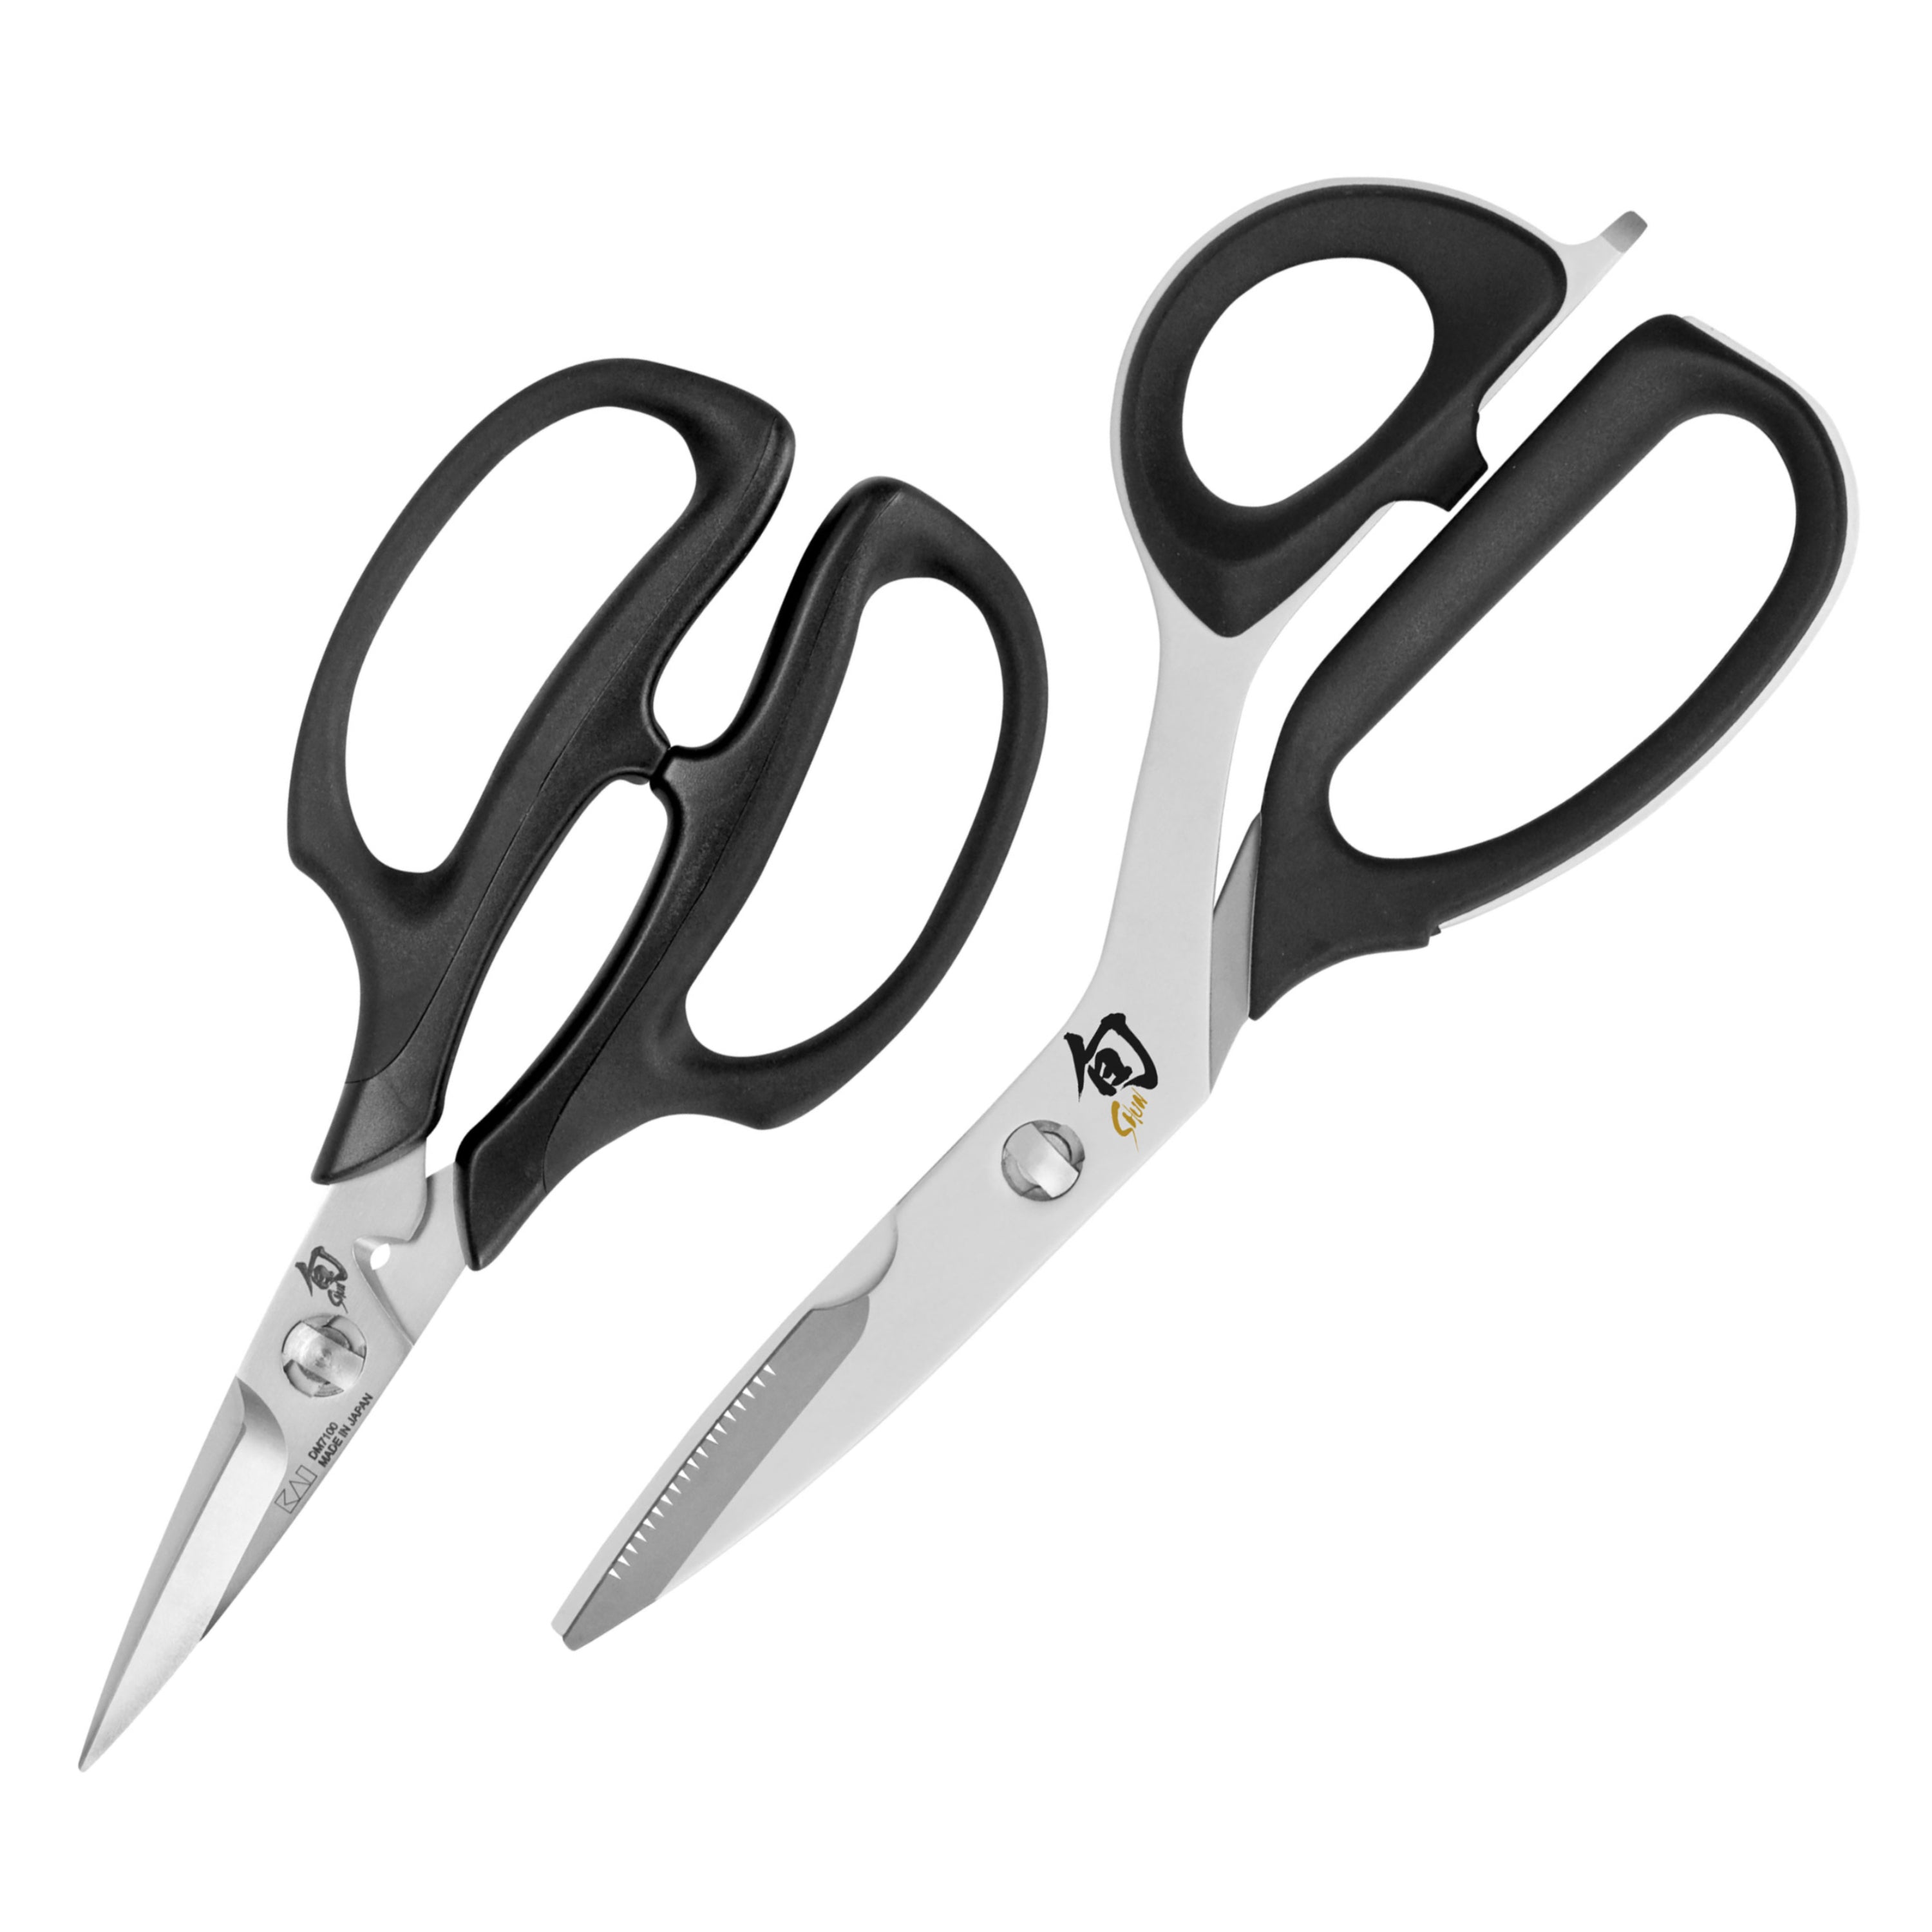 Best Kitchen Shears—Kitchen Shears from the ER